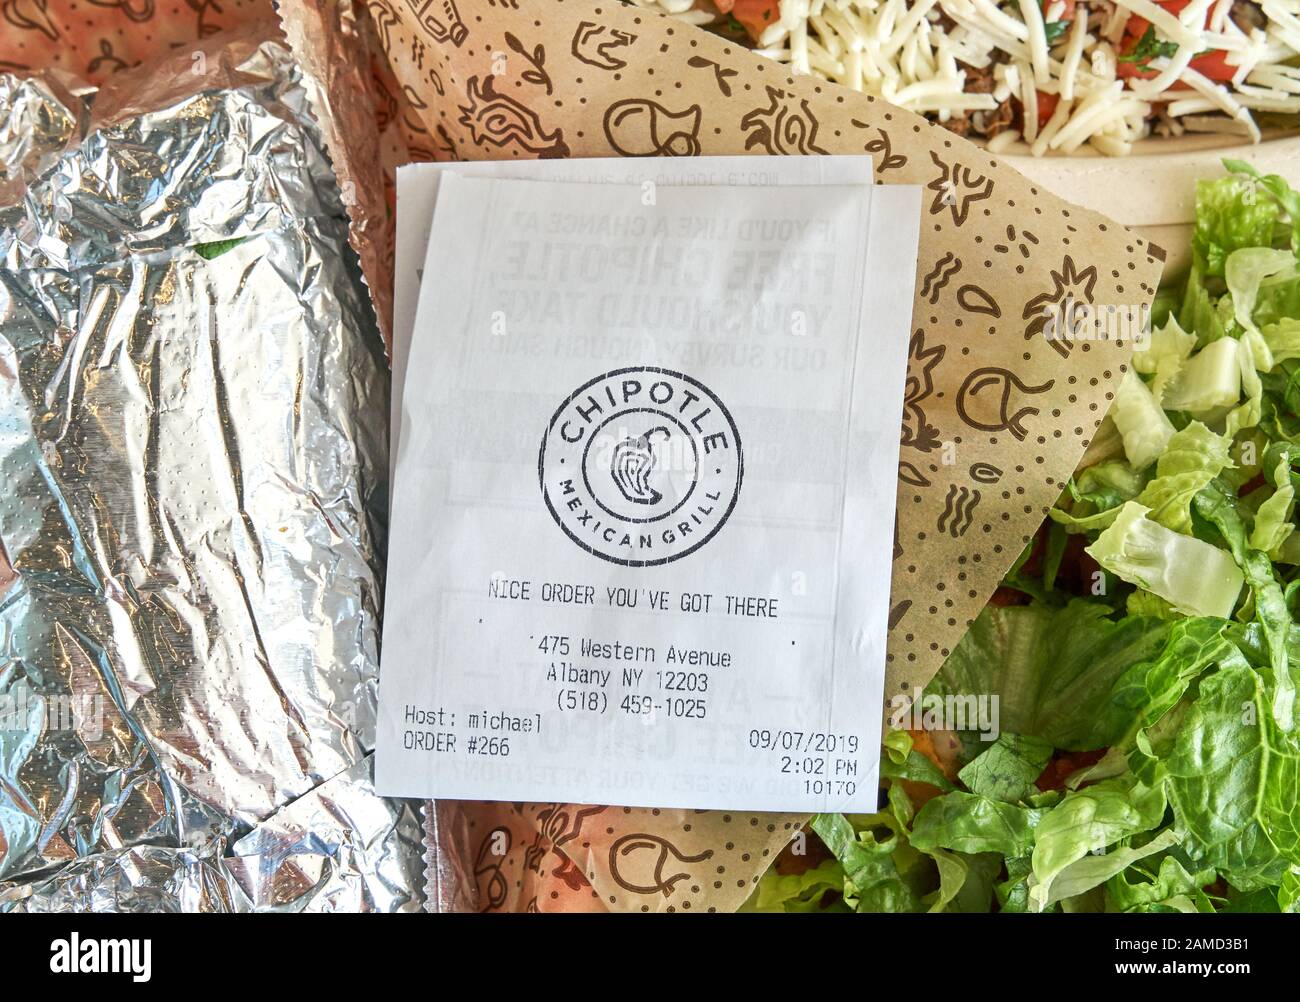 Montreal, Canada - September 7, 2019: Chipotle plate and receipt with salad. Chipotle, is an American chain of fast casual restaurants specializing in Stock Photo